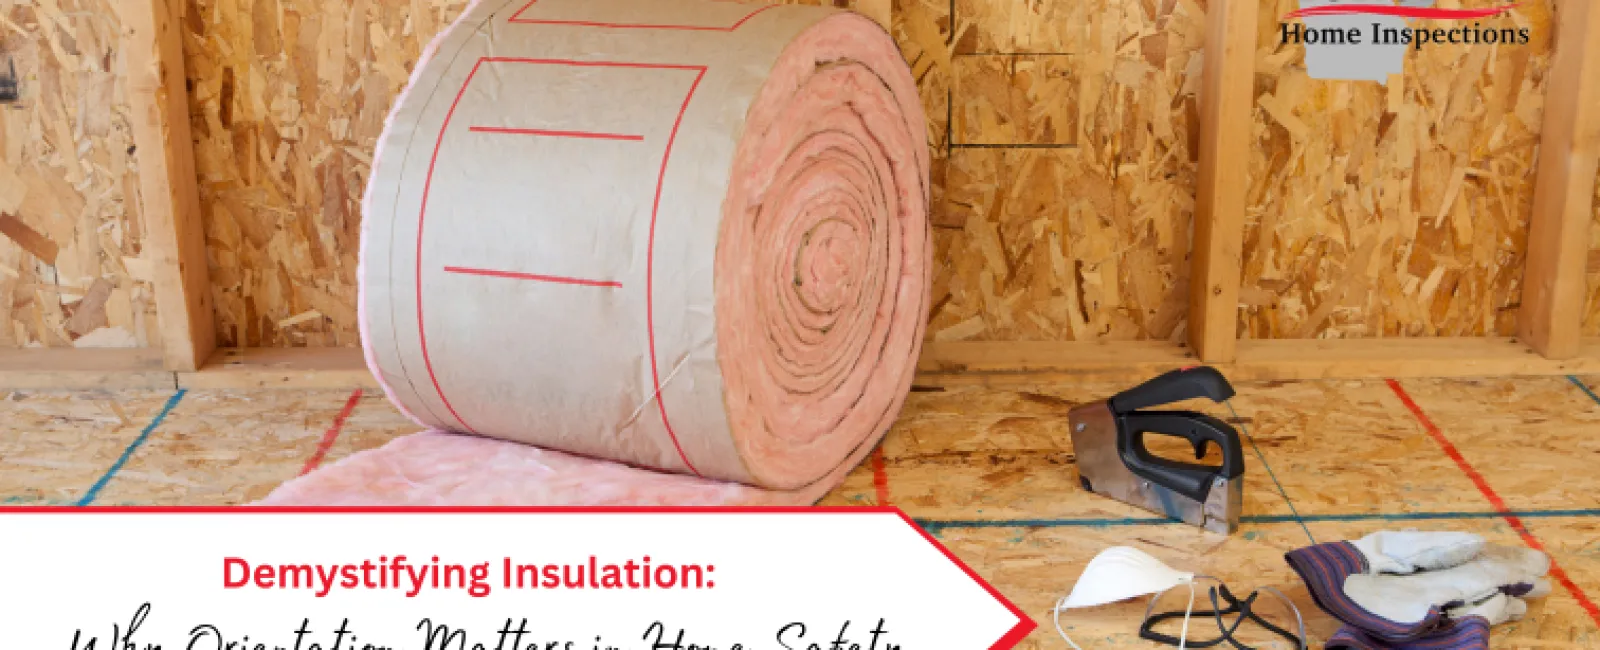 Demystifying Insulation: Why Orientation Matters in Home Safety